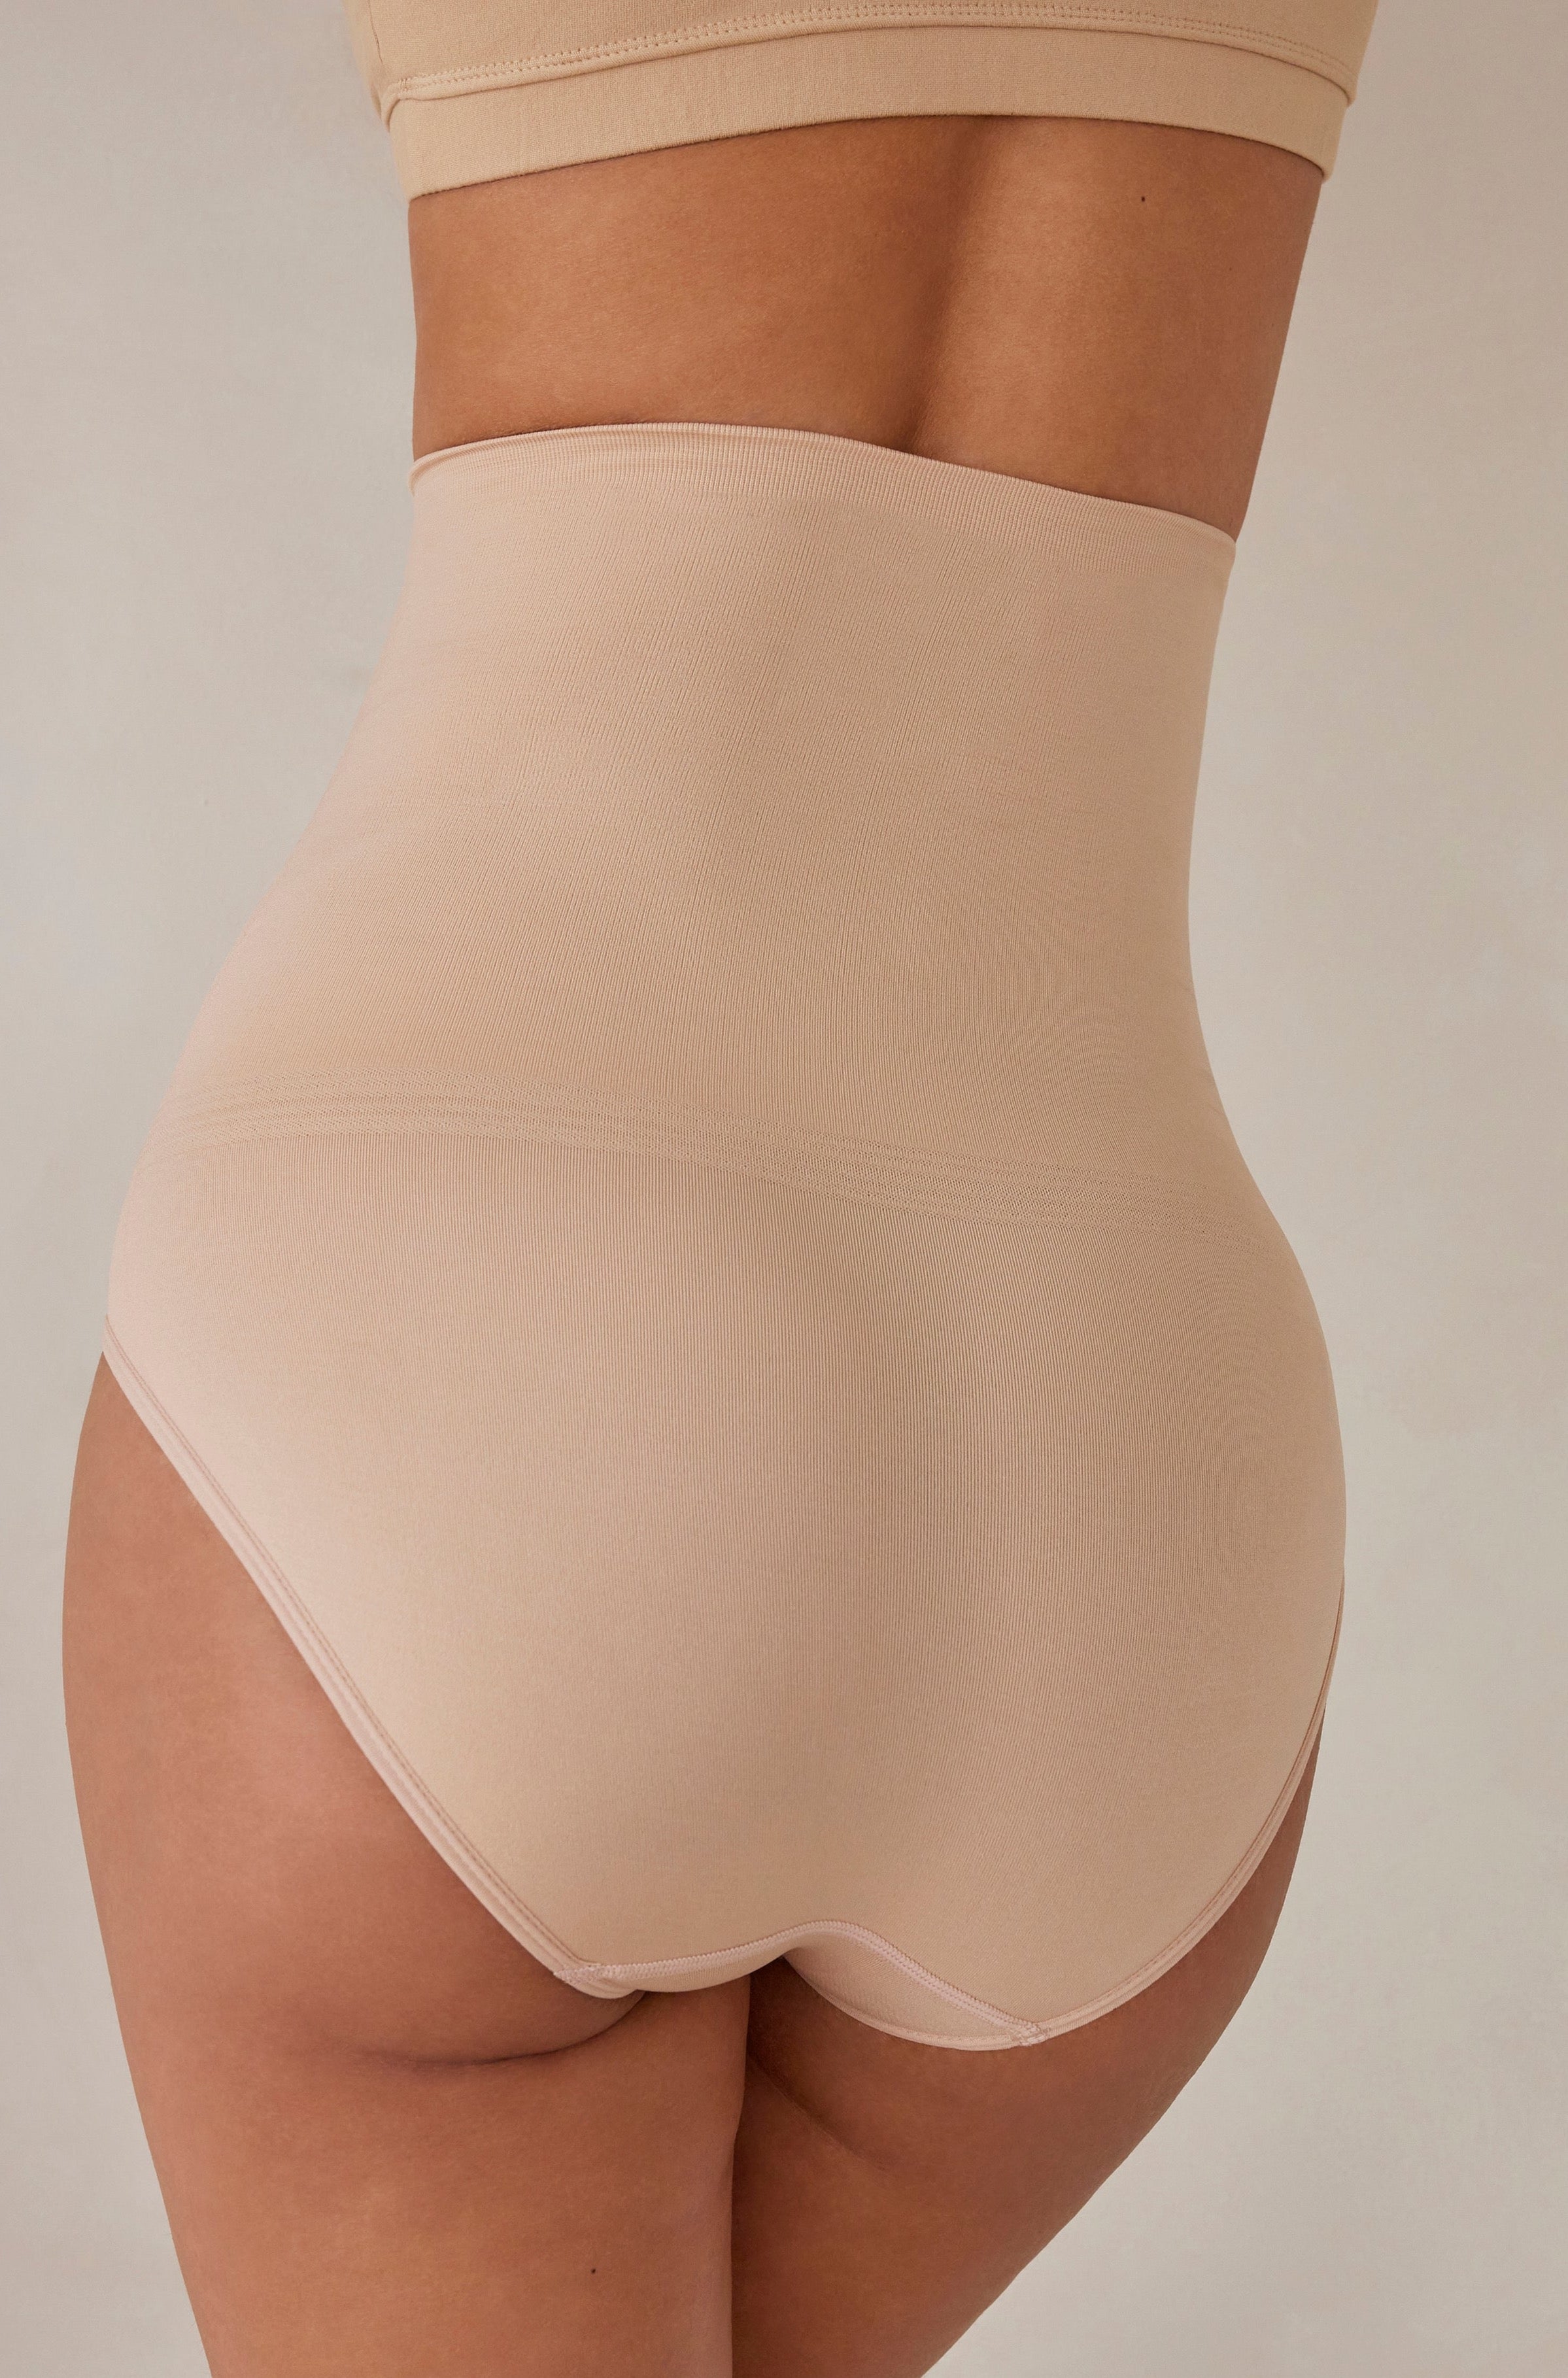  Customer reviews: Spanx Women's Active Compression